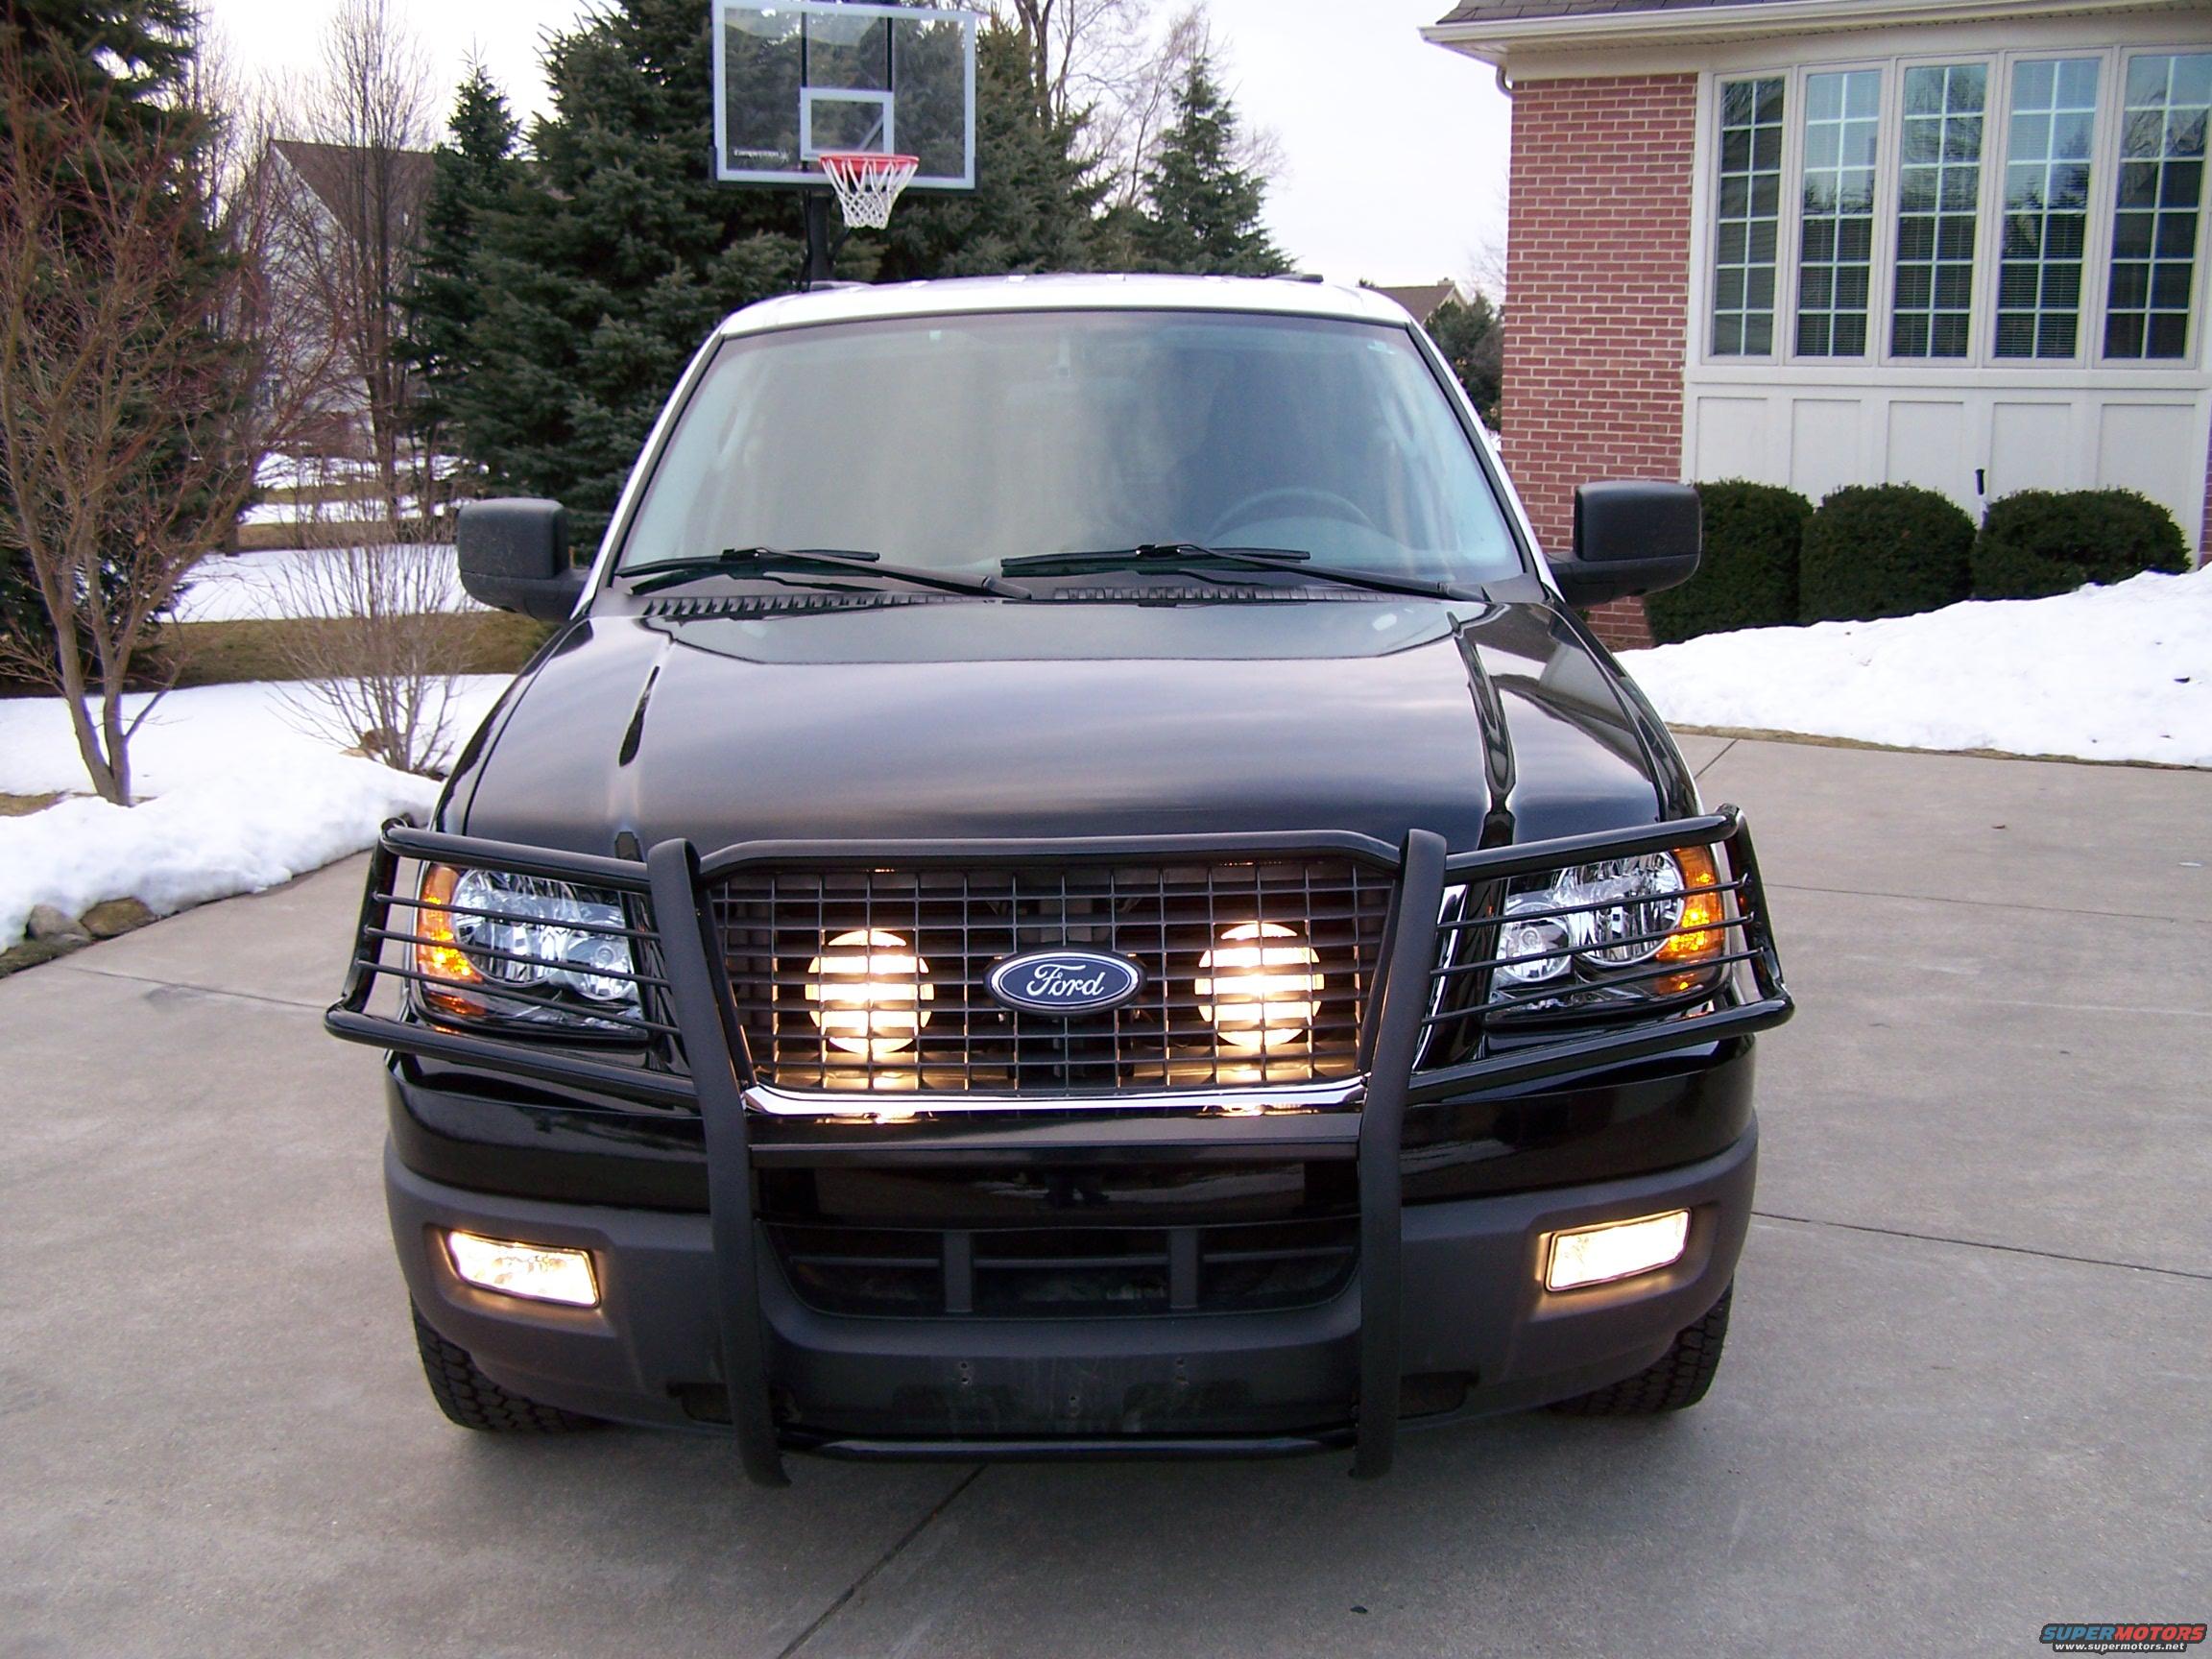 2004 Ford expedition bumper #5